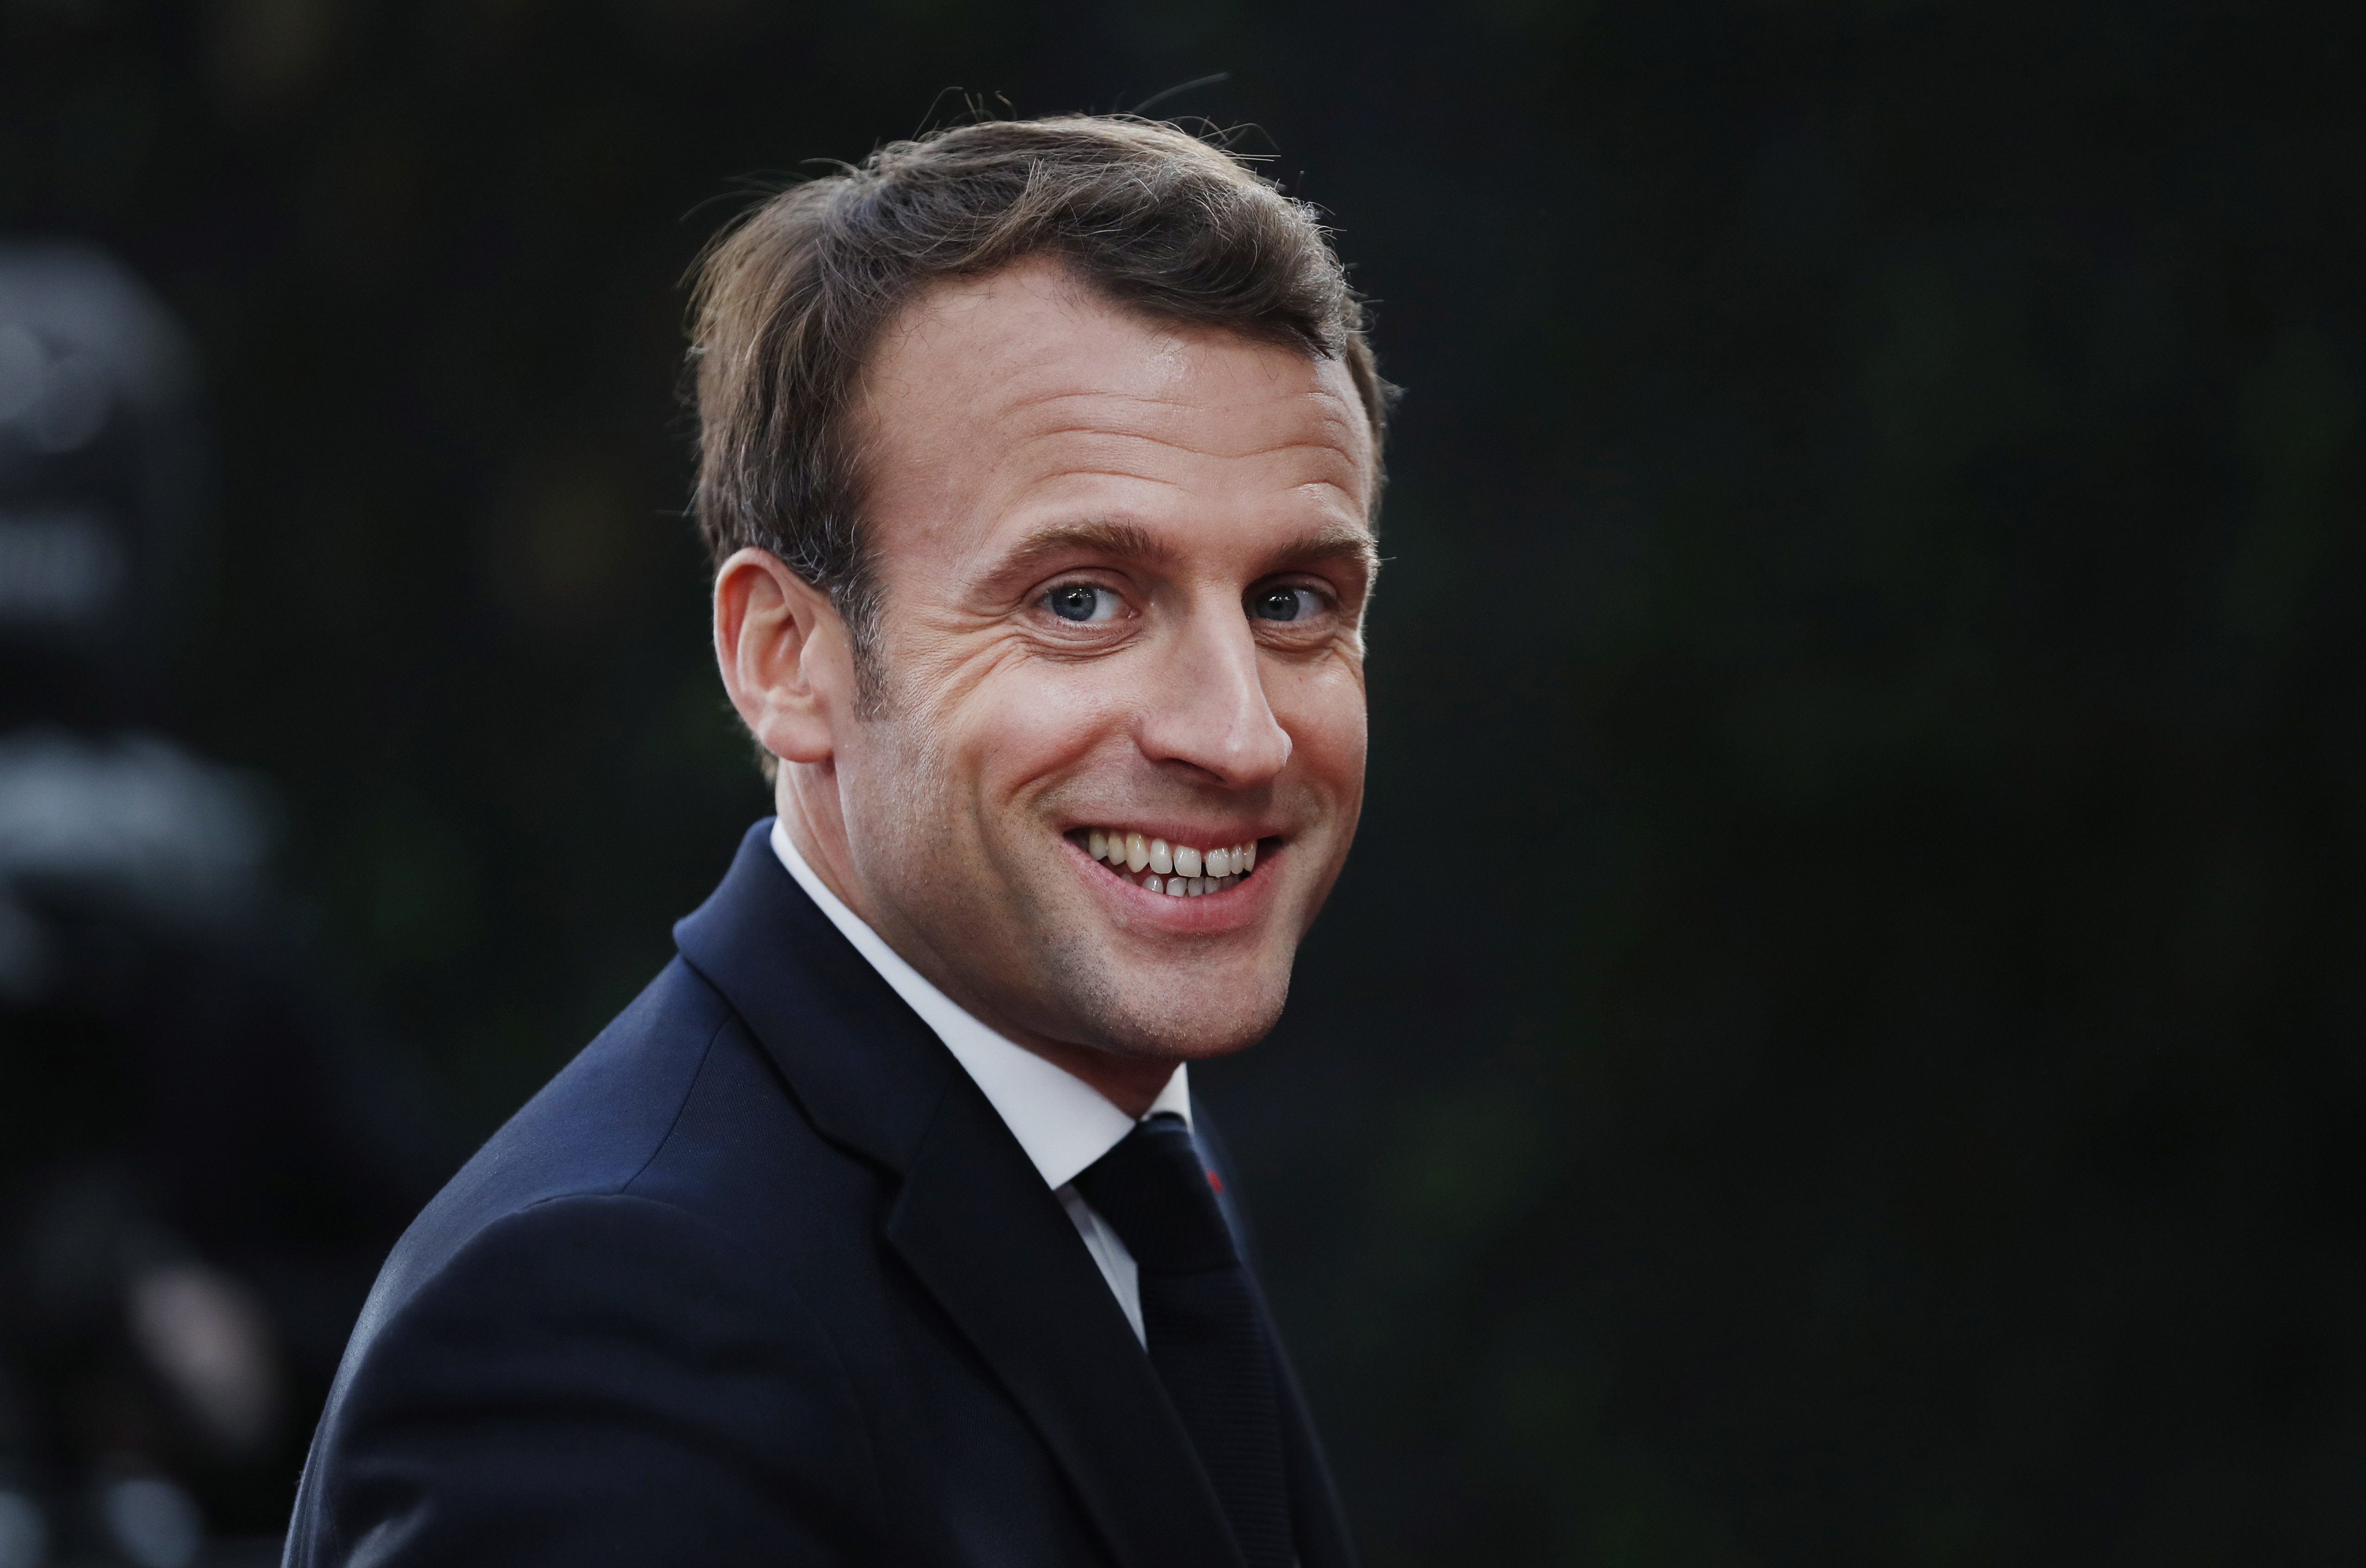 epa07496805 French President Emmanuel Macron arrives for an EU summit at the Europa building in Brussels, Belgium, 10 April 2019. European Union leaders meet in Brussels for an emergency summit to discuss a new Brexit extension.  EPA/ALASTAIR GRANT